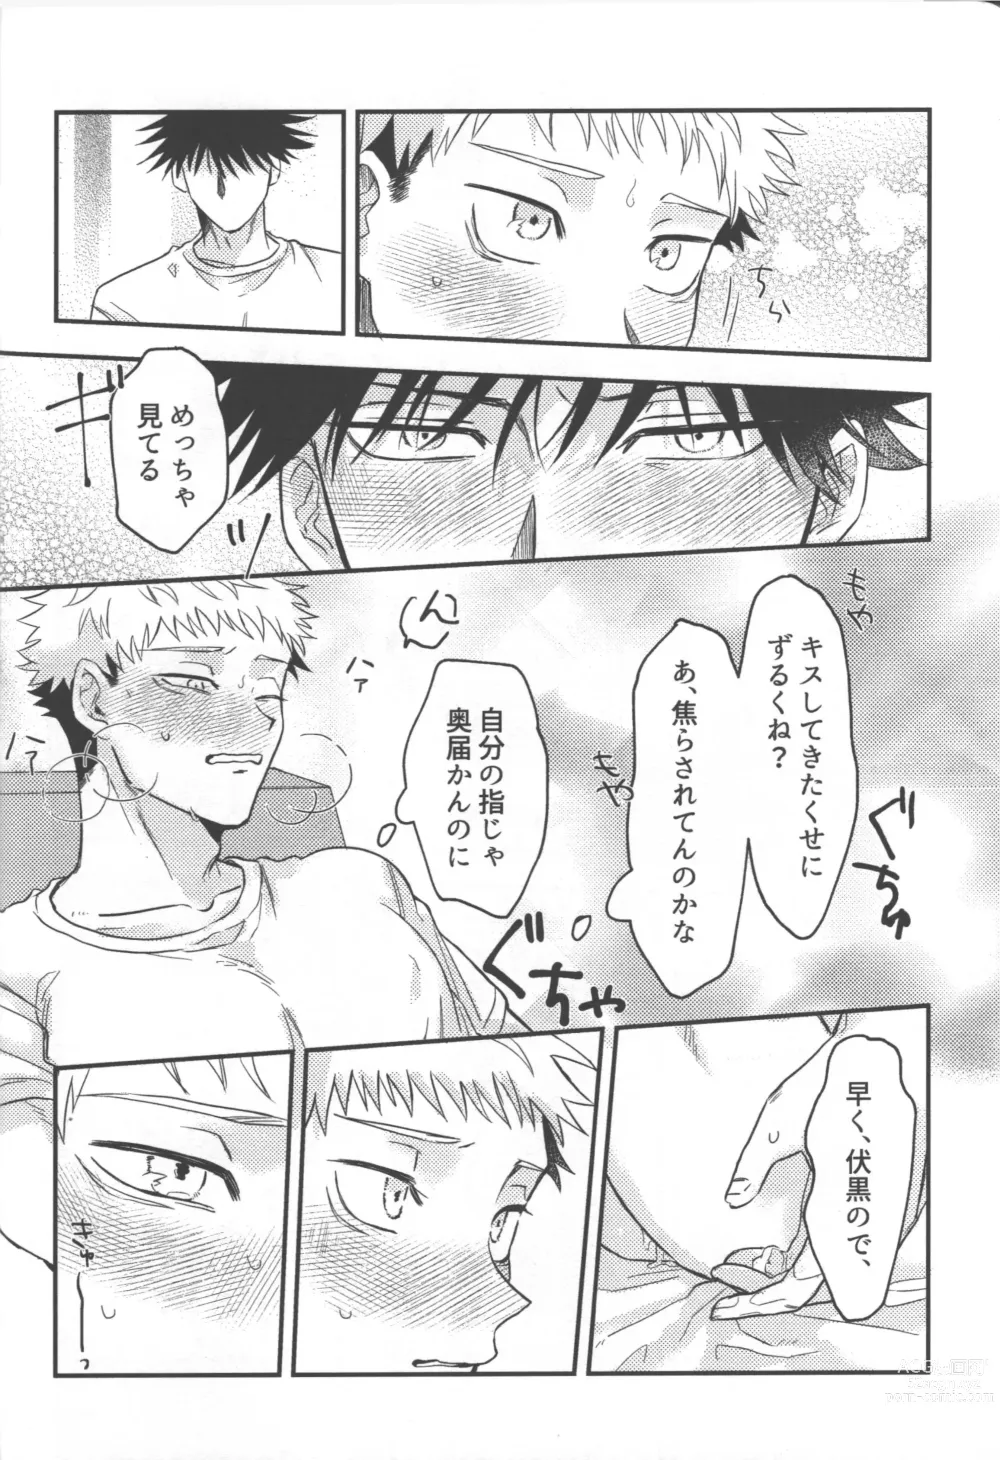 Page 25 of doujinshi Dont Look at ME Like That.